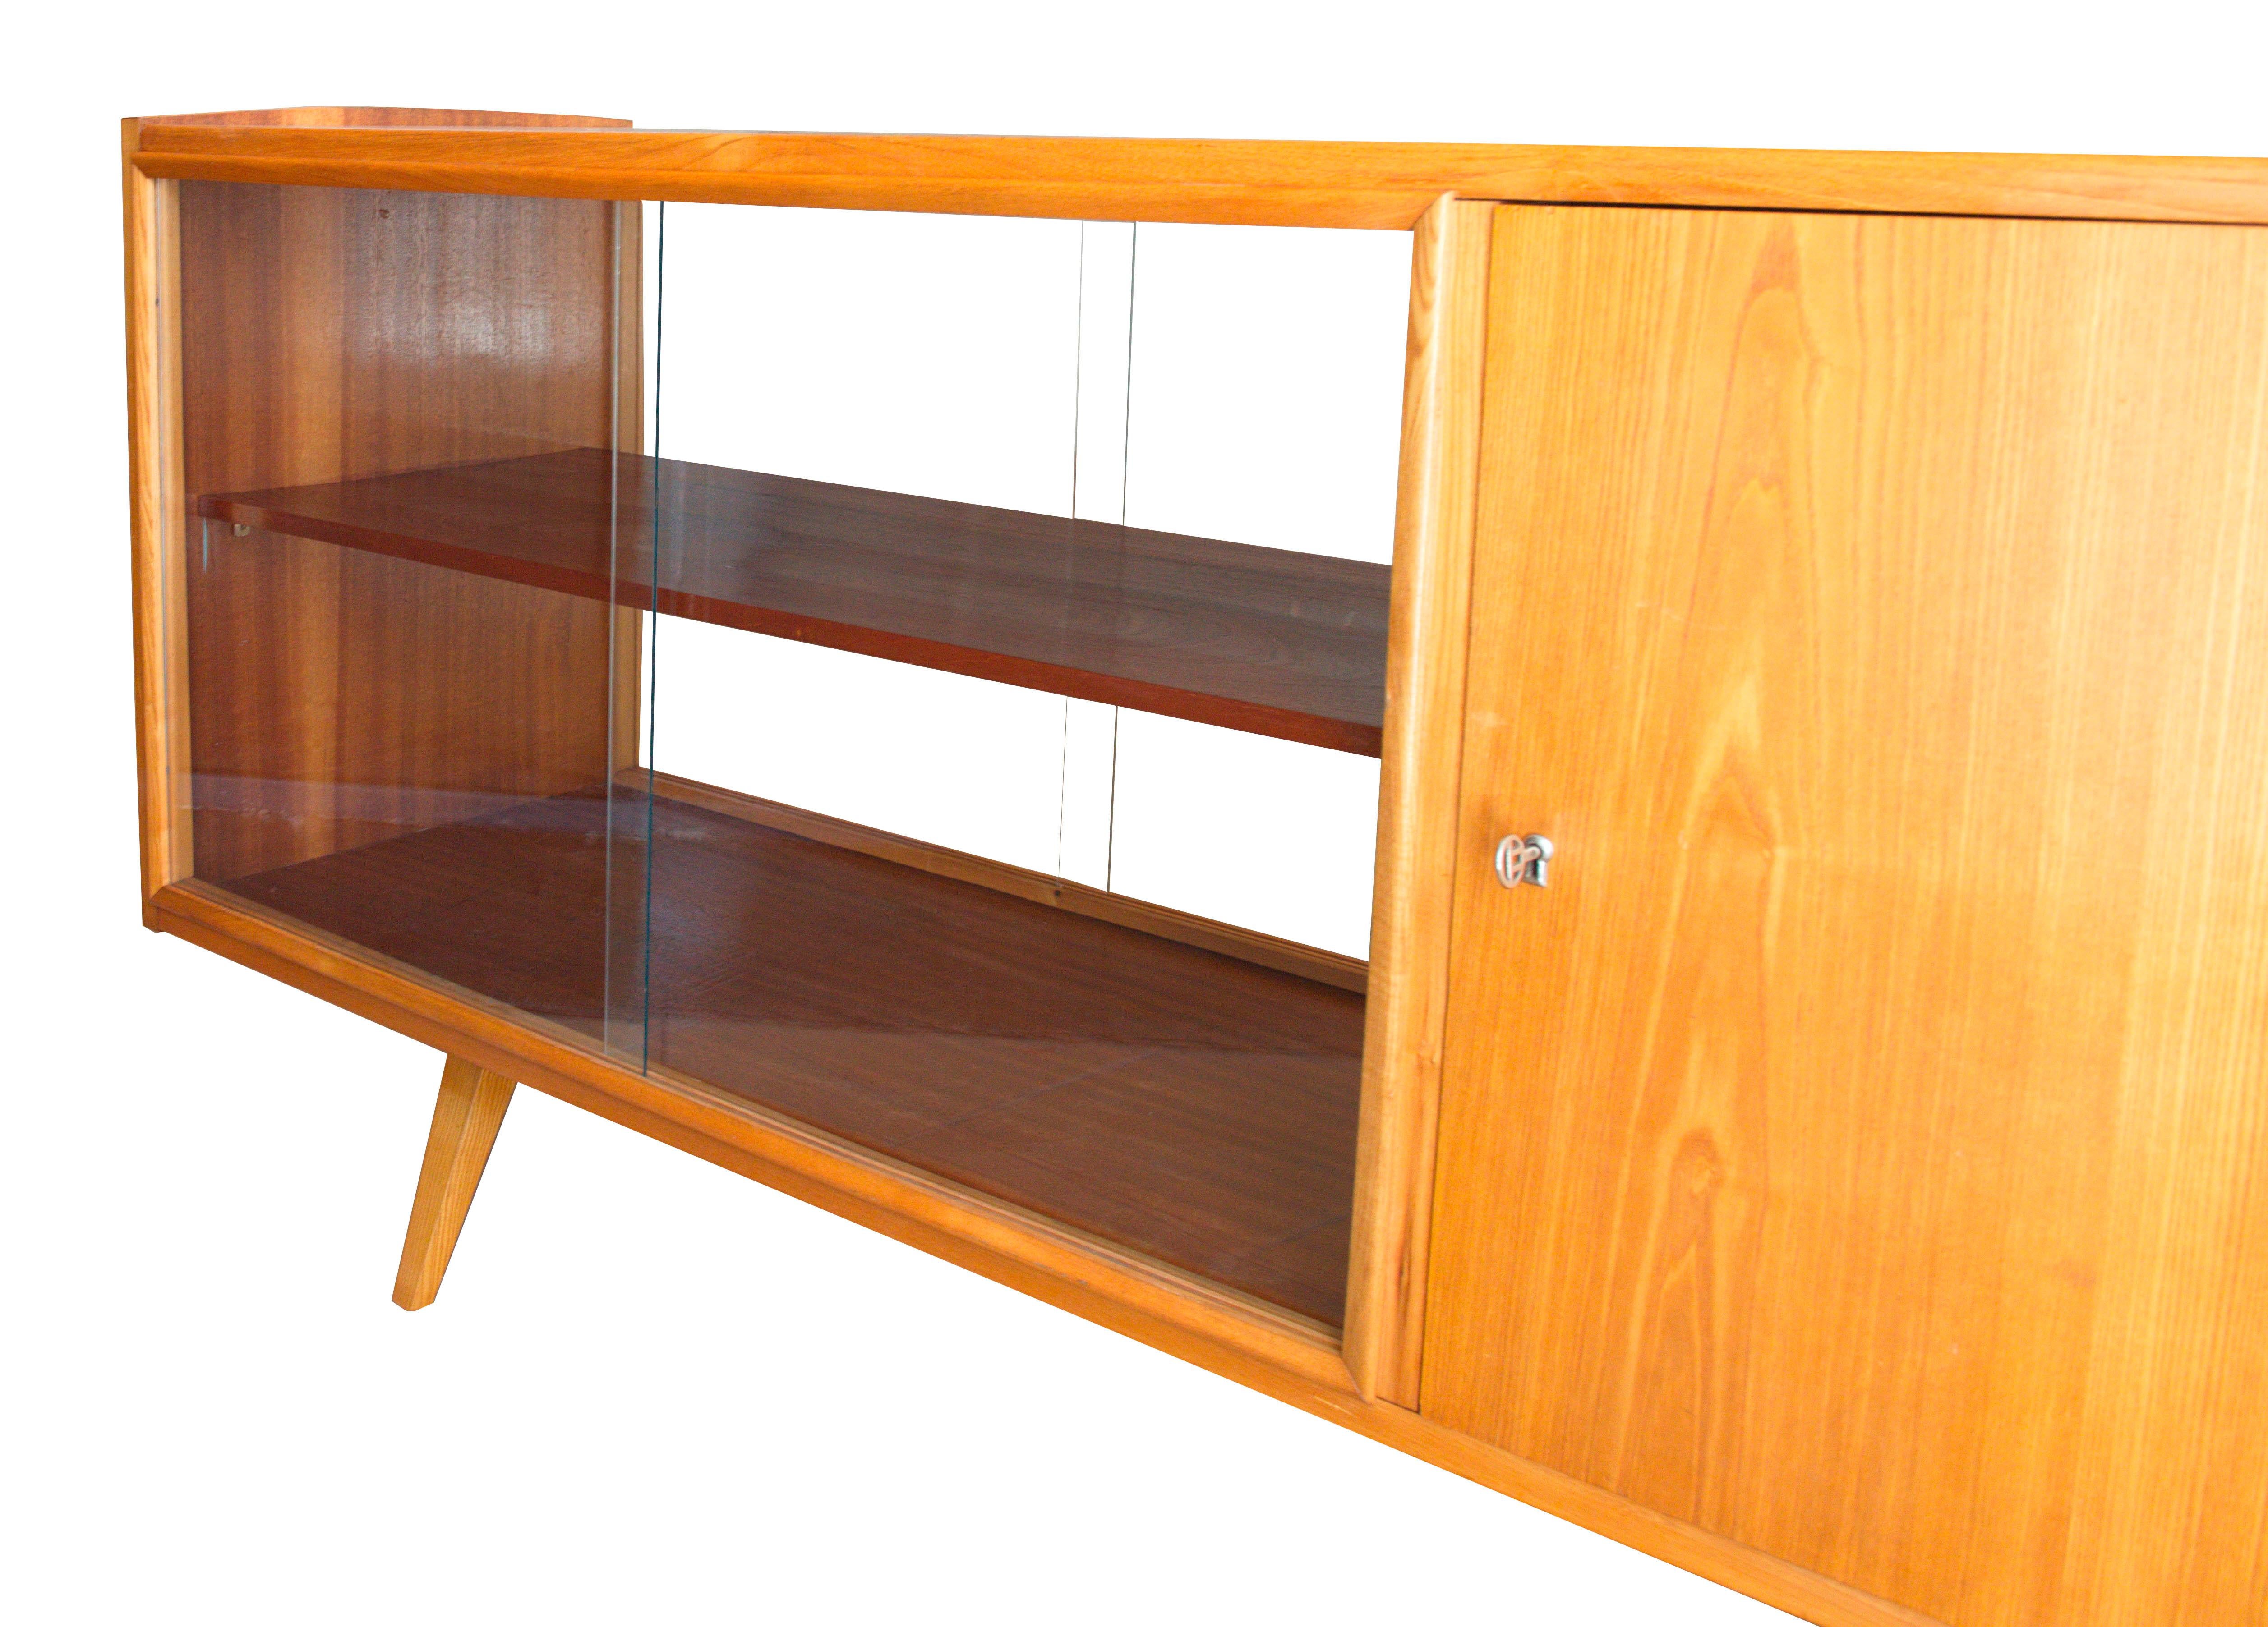 1960s Midcentury Ash Sideboard with Glass Sliding Doors by Frantisek Jirak In Good Condition For Sale In Brno, CZ